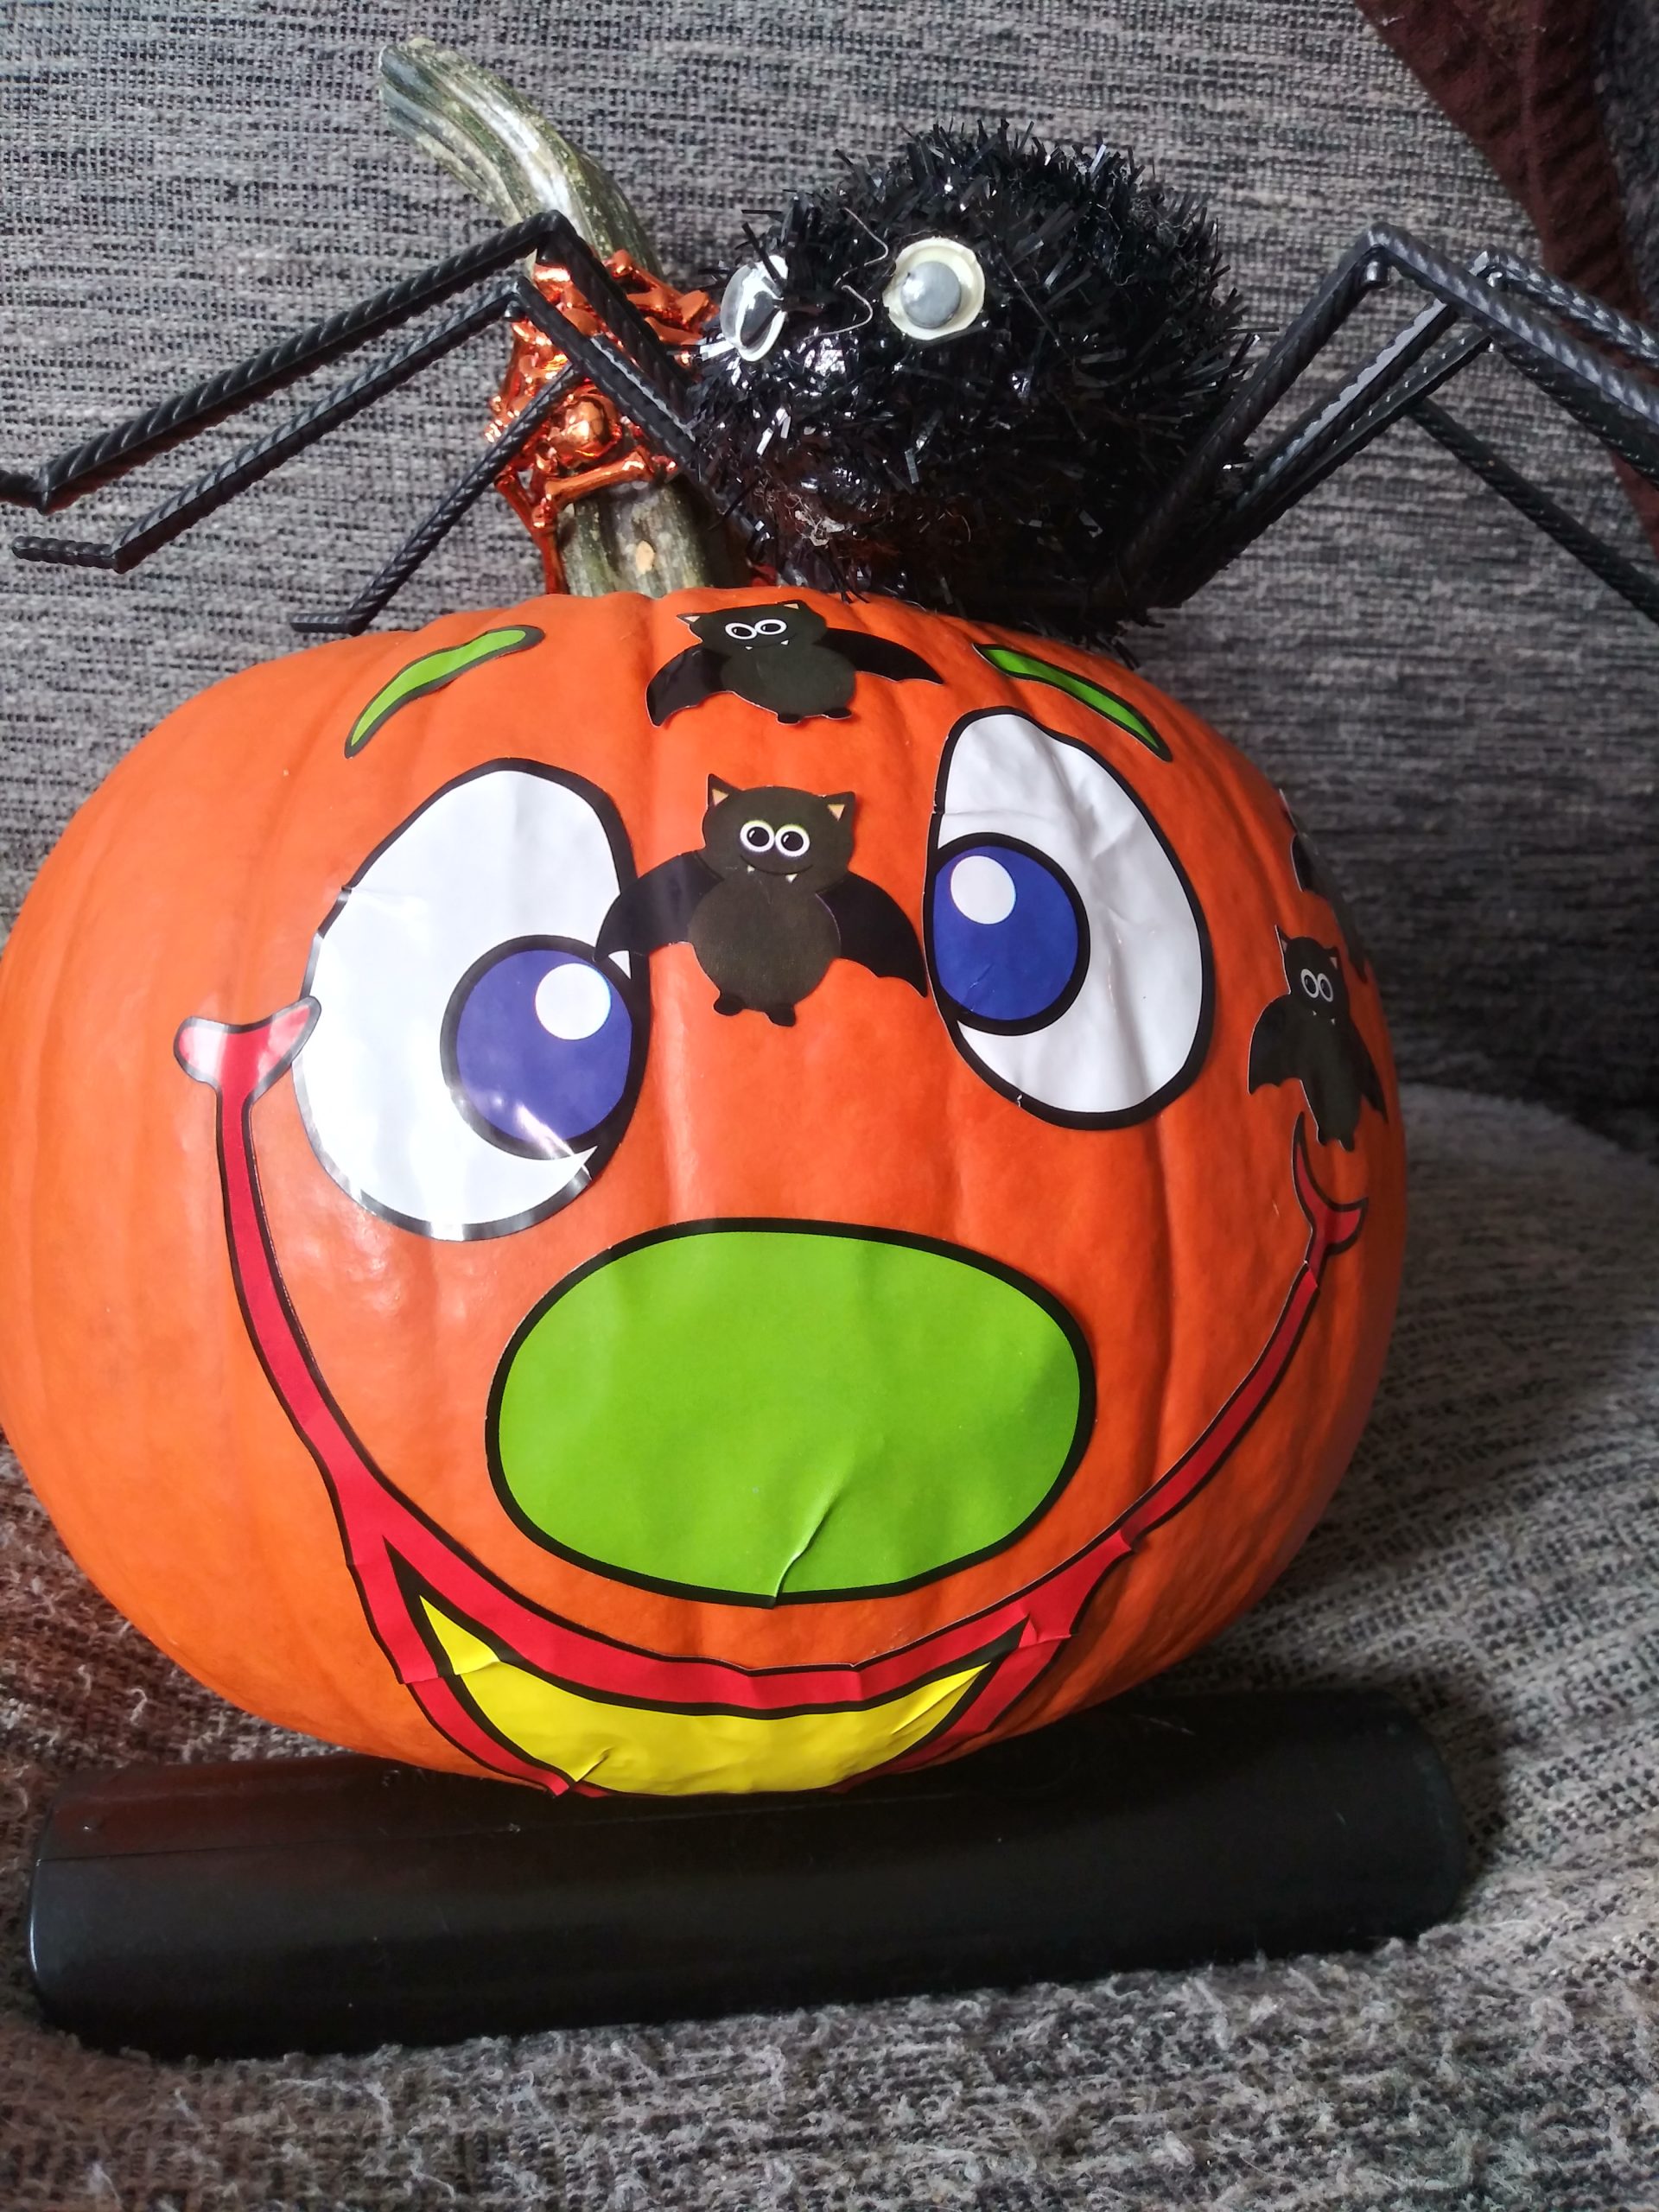 A pumpkin decorated with a clown face with a spider on top of it